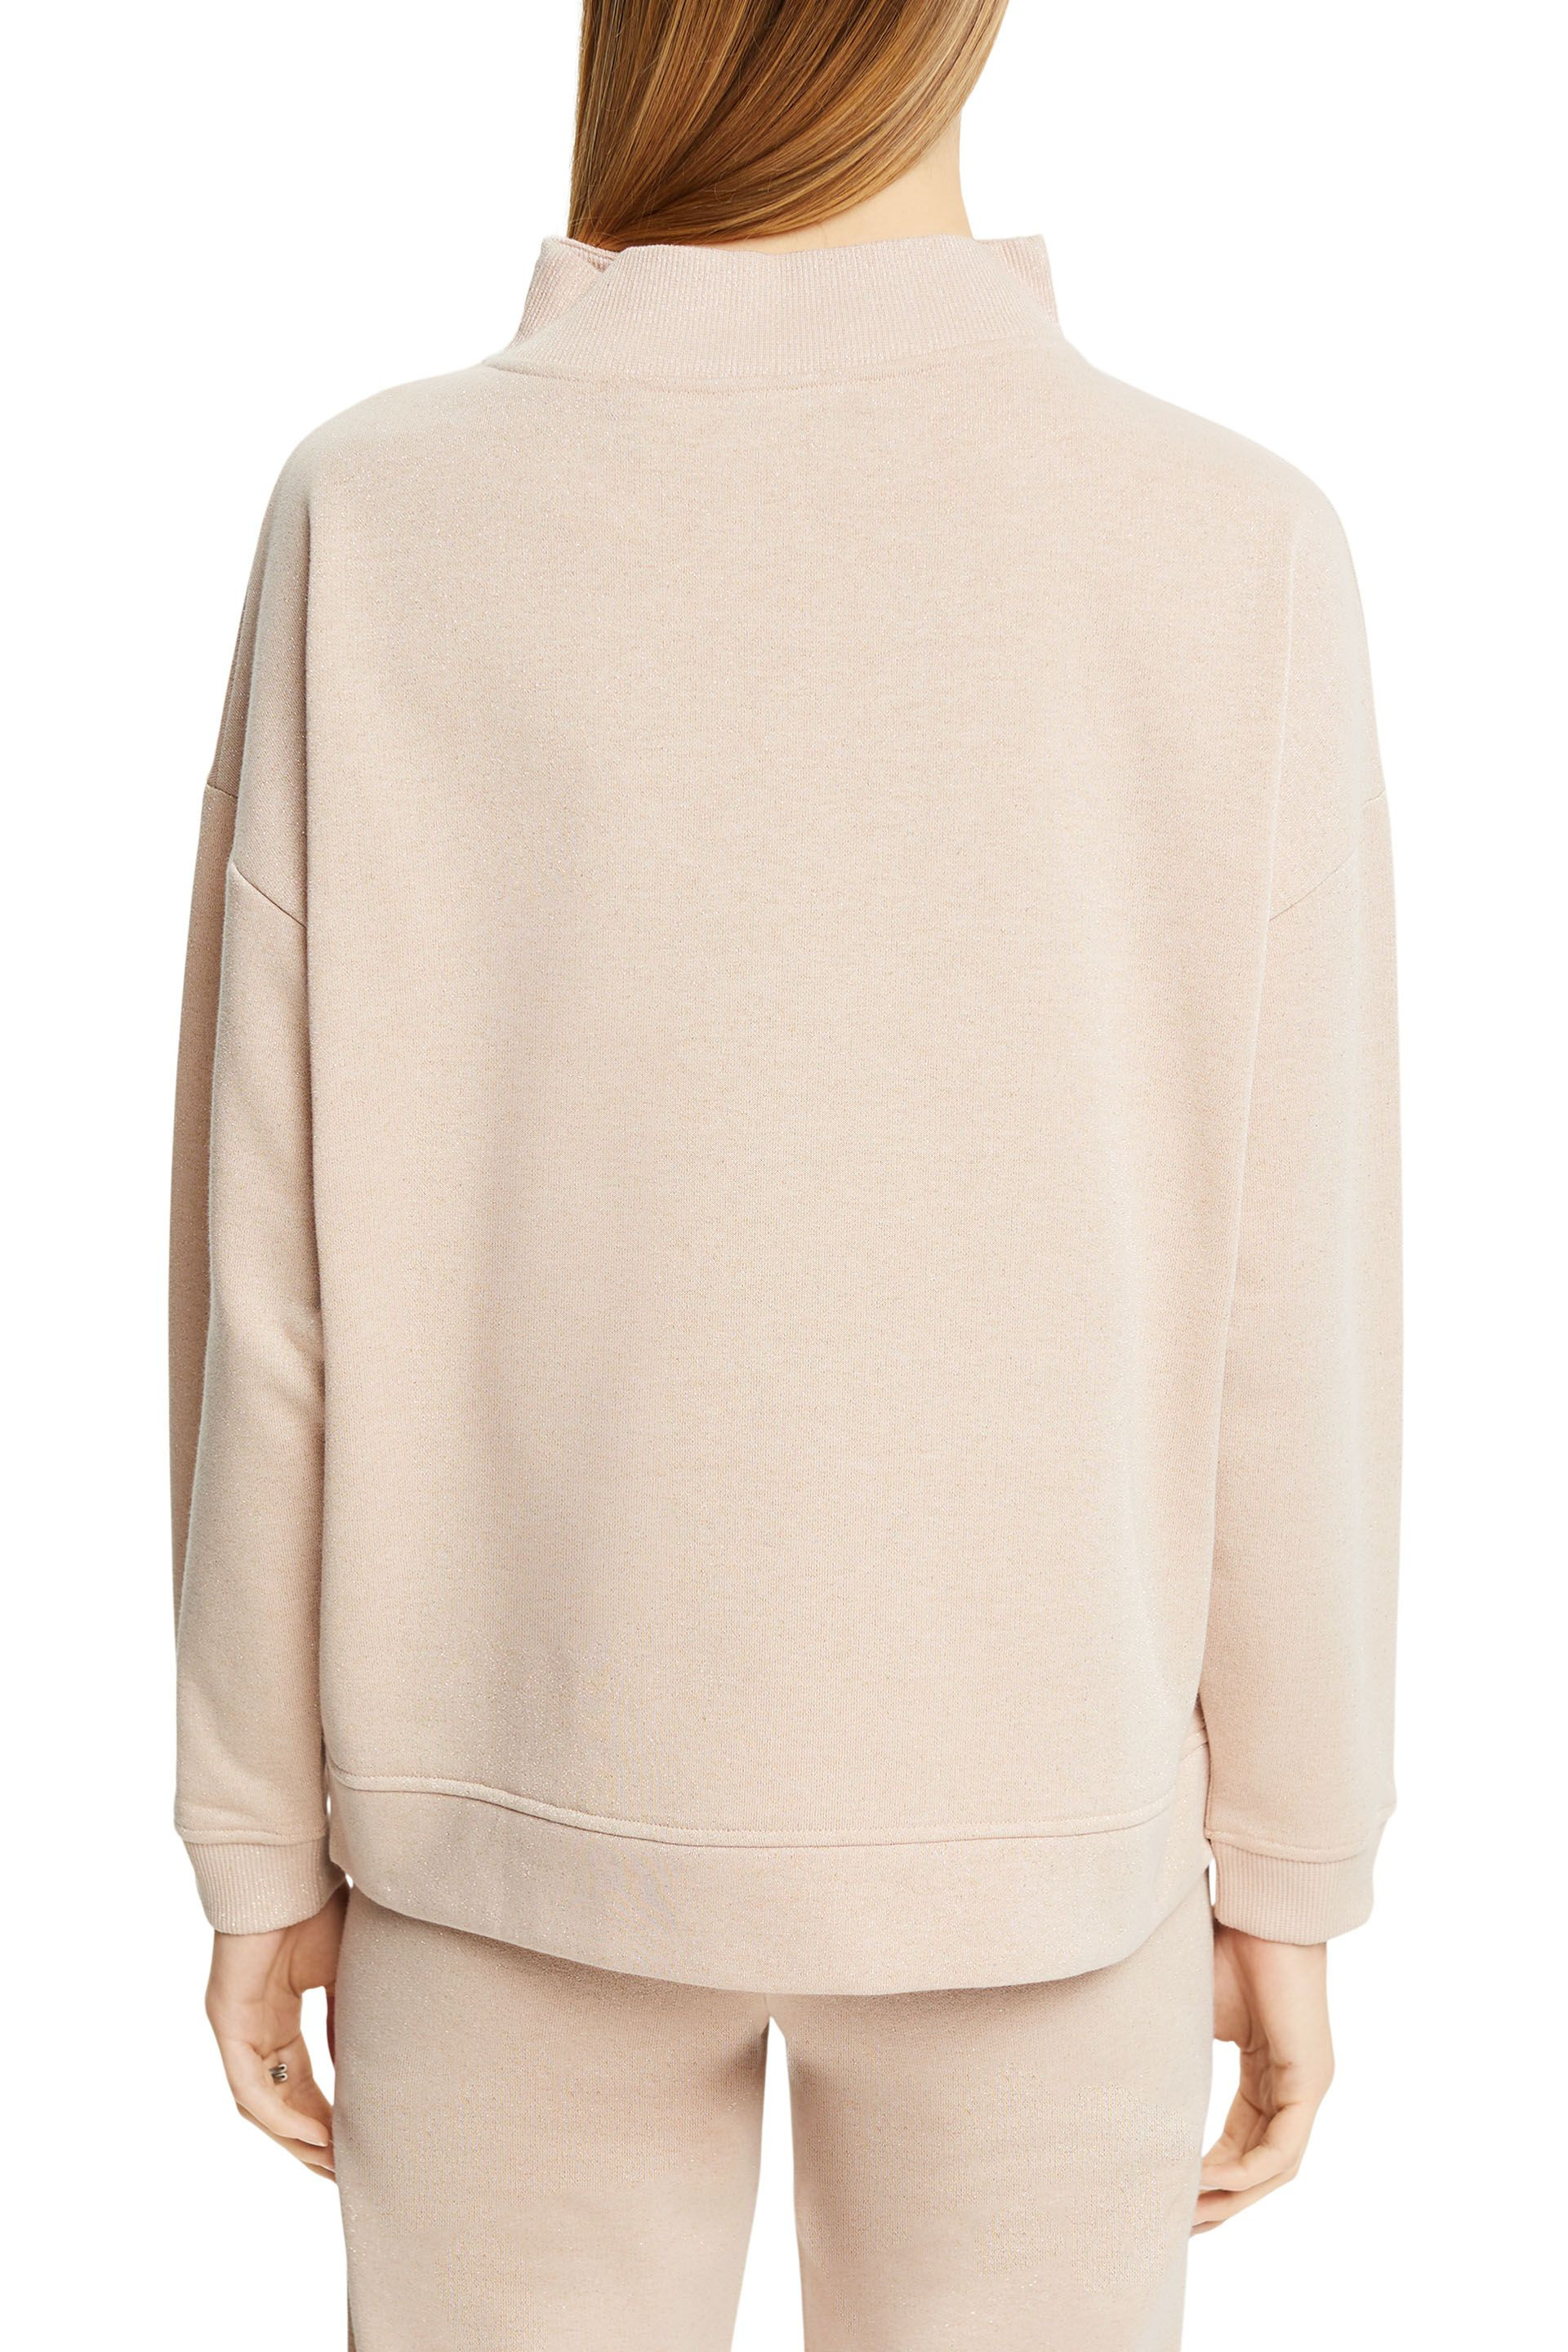 Esprit - Oversized sweatshirt with glitter effect in cotton blend, Natural, large image number 2